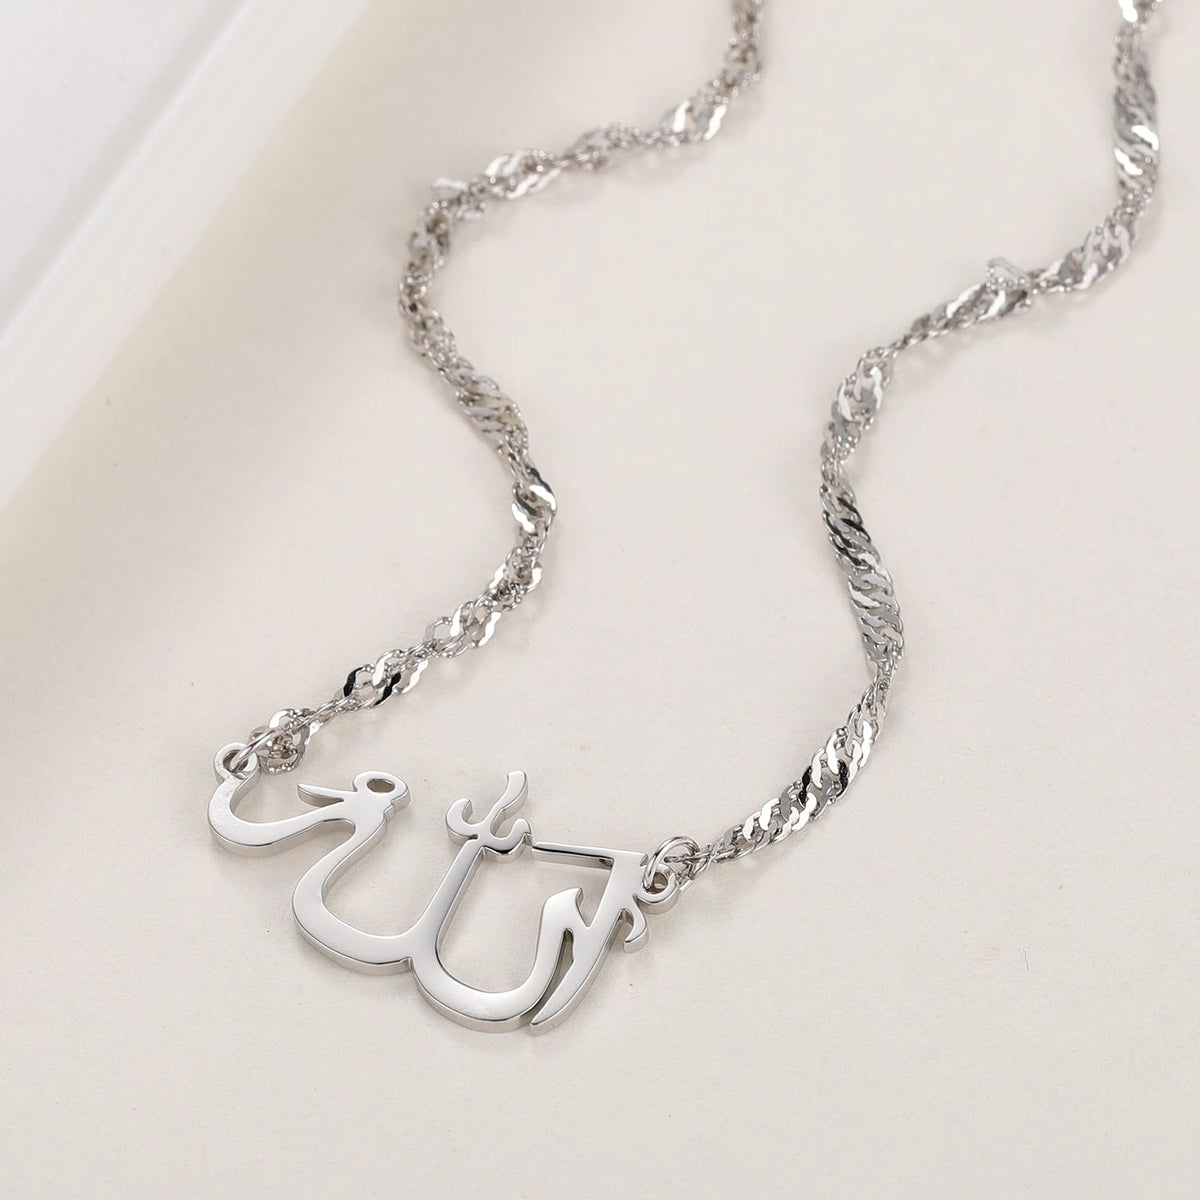 Allah Name Necklace In Arabic Calligraphy